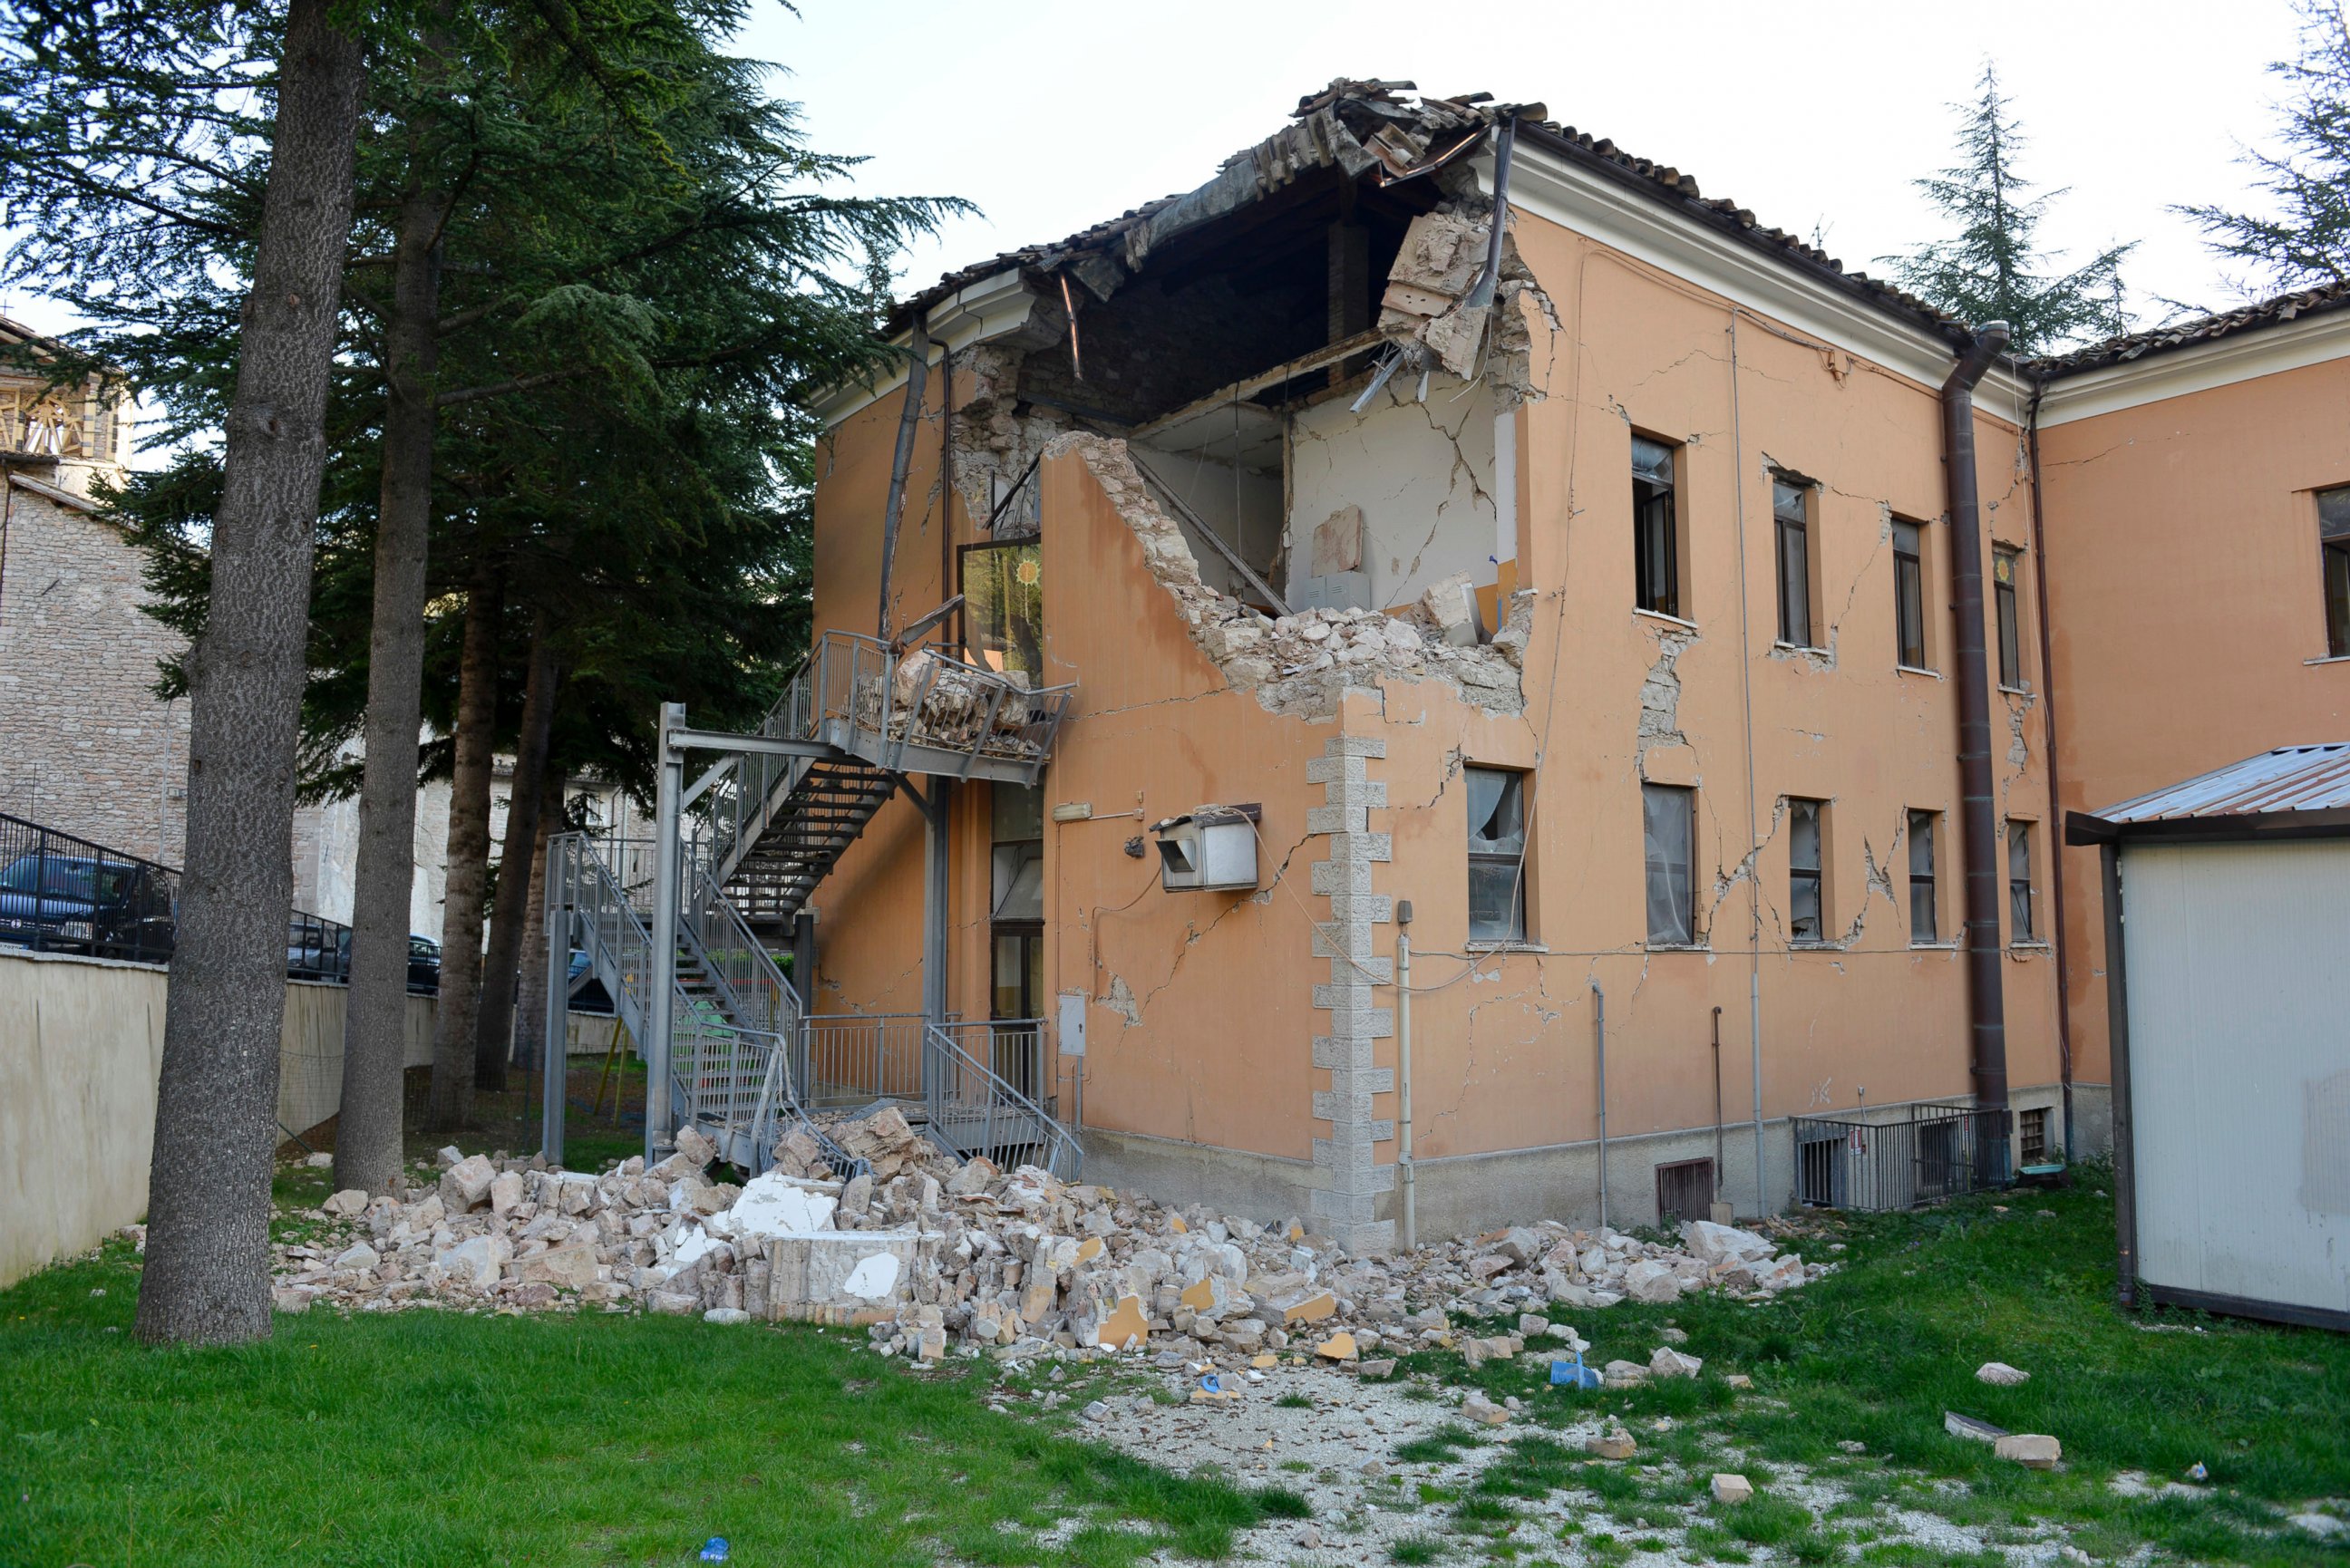 PHOTO: The damaged Pietro Capuzi school in Visso, Italy, Oct. 27, 2016, after a 5.9 earthquake destroyed part of the town.